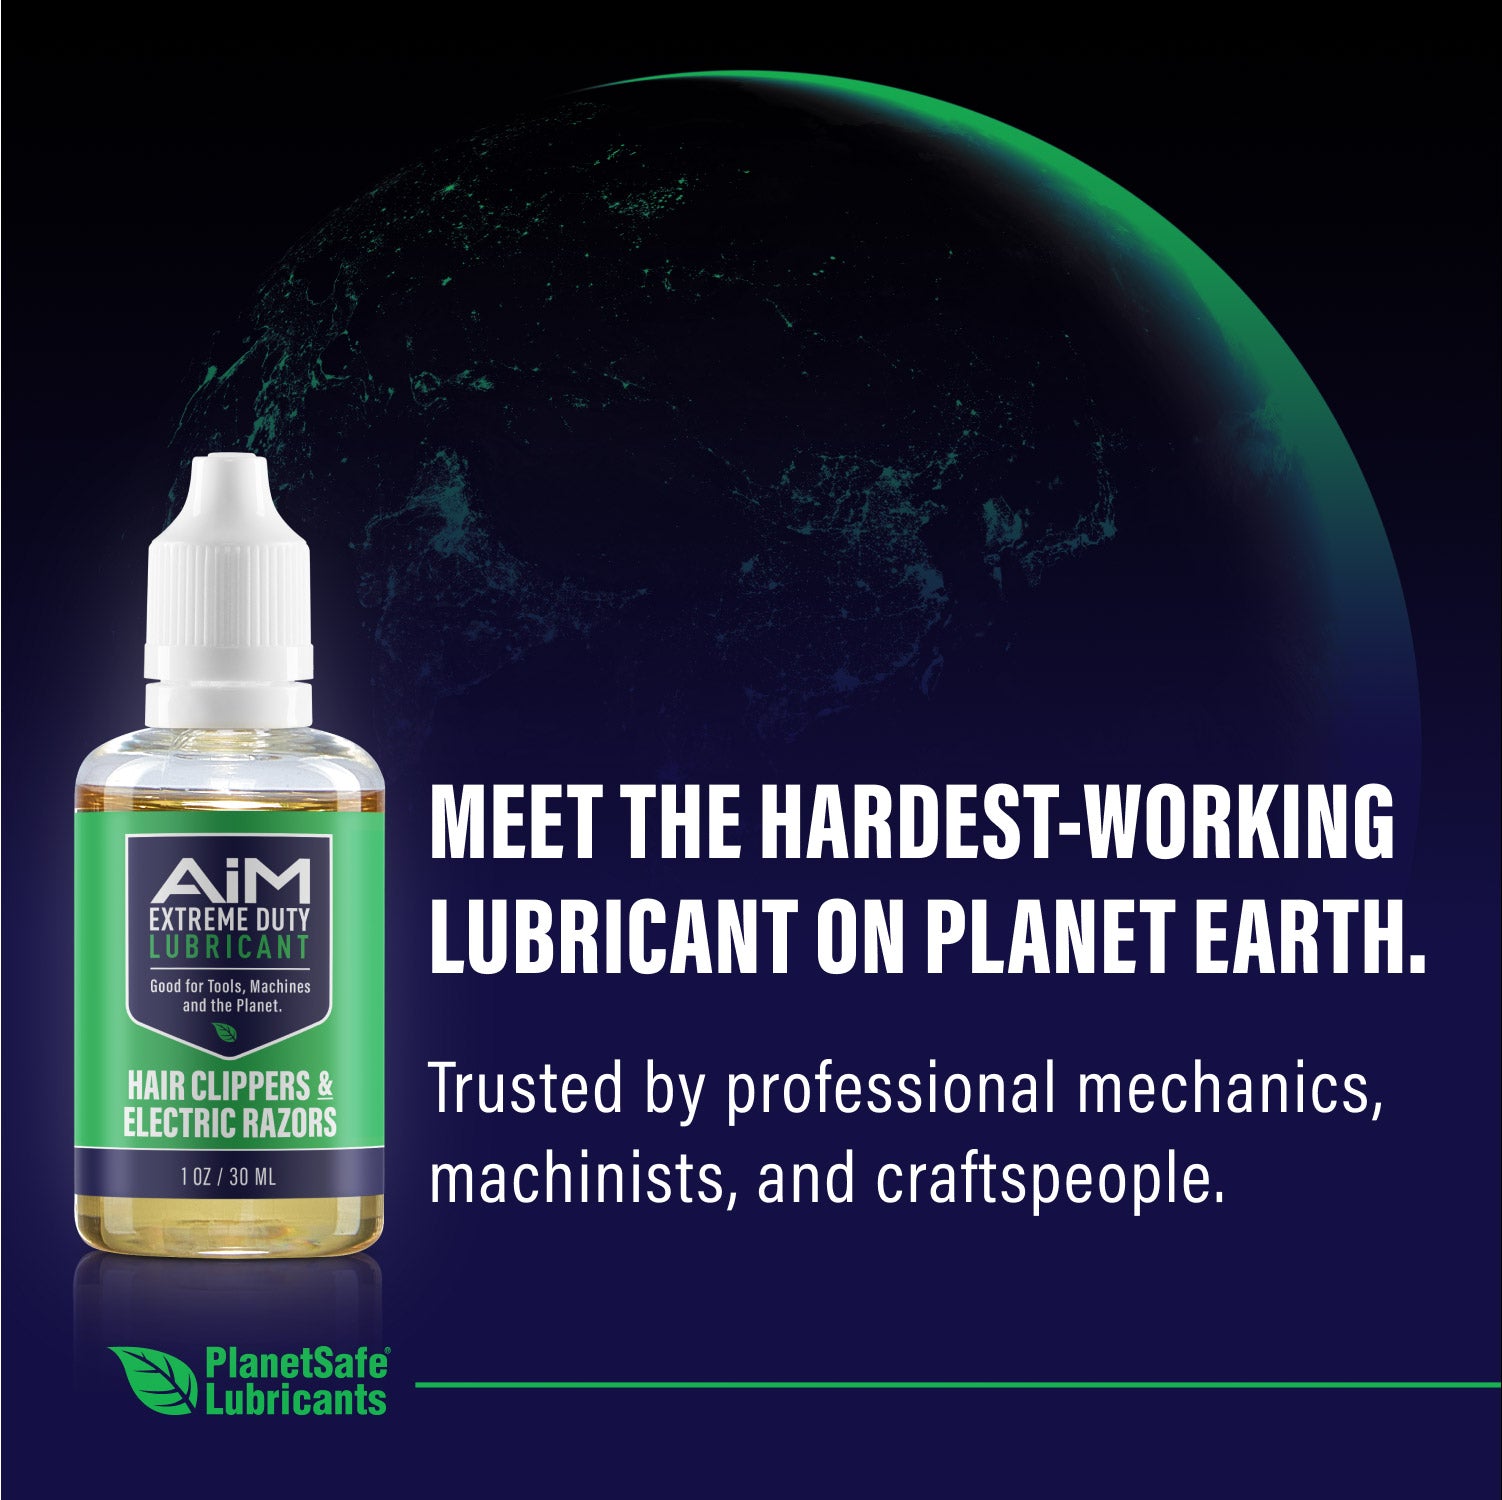 Hair Clipper, Trimmer, and Electric Razor Lubricant Oil - PlanetSafe AIM Extreme Duty Lubricant 1oz